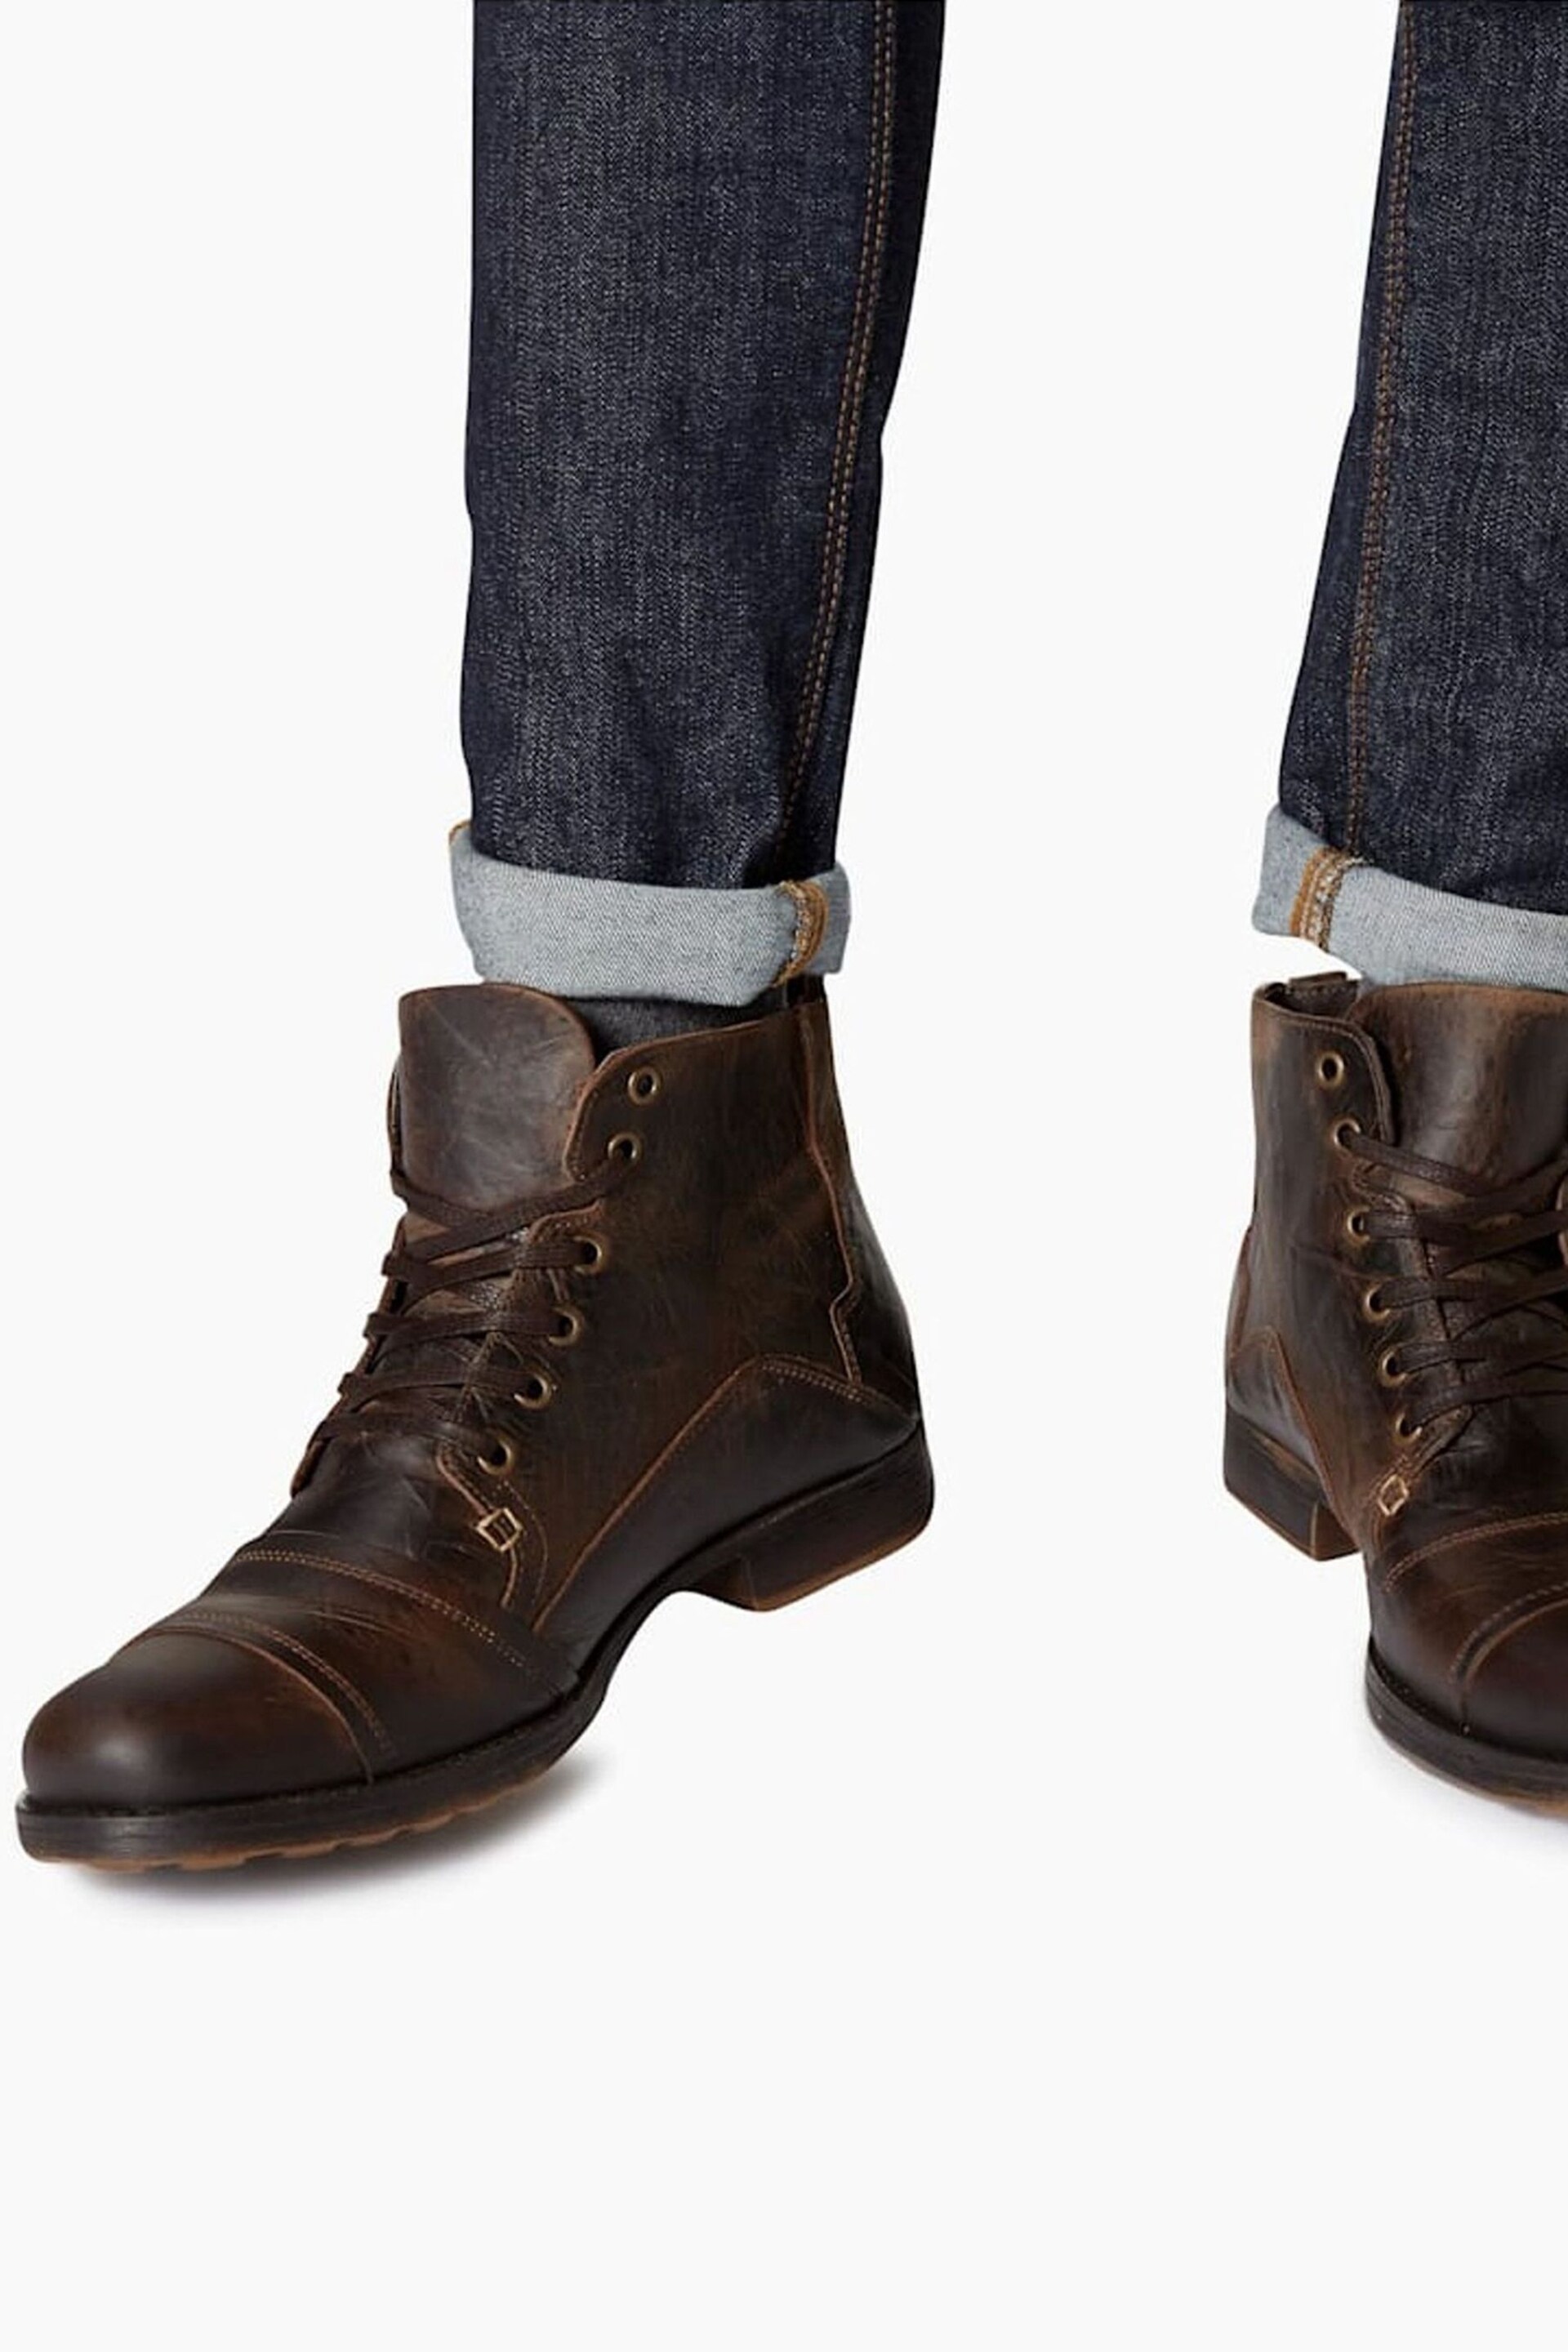 Dune London Brown Heavy Duty Leather Simon Ankle Boots - Image 3 of 6